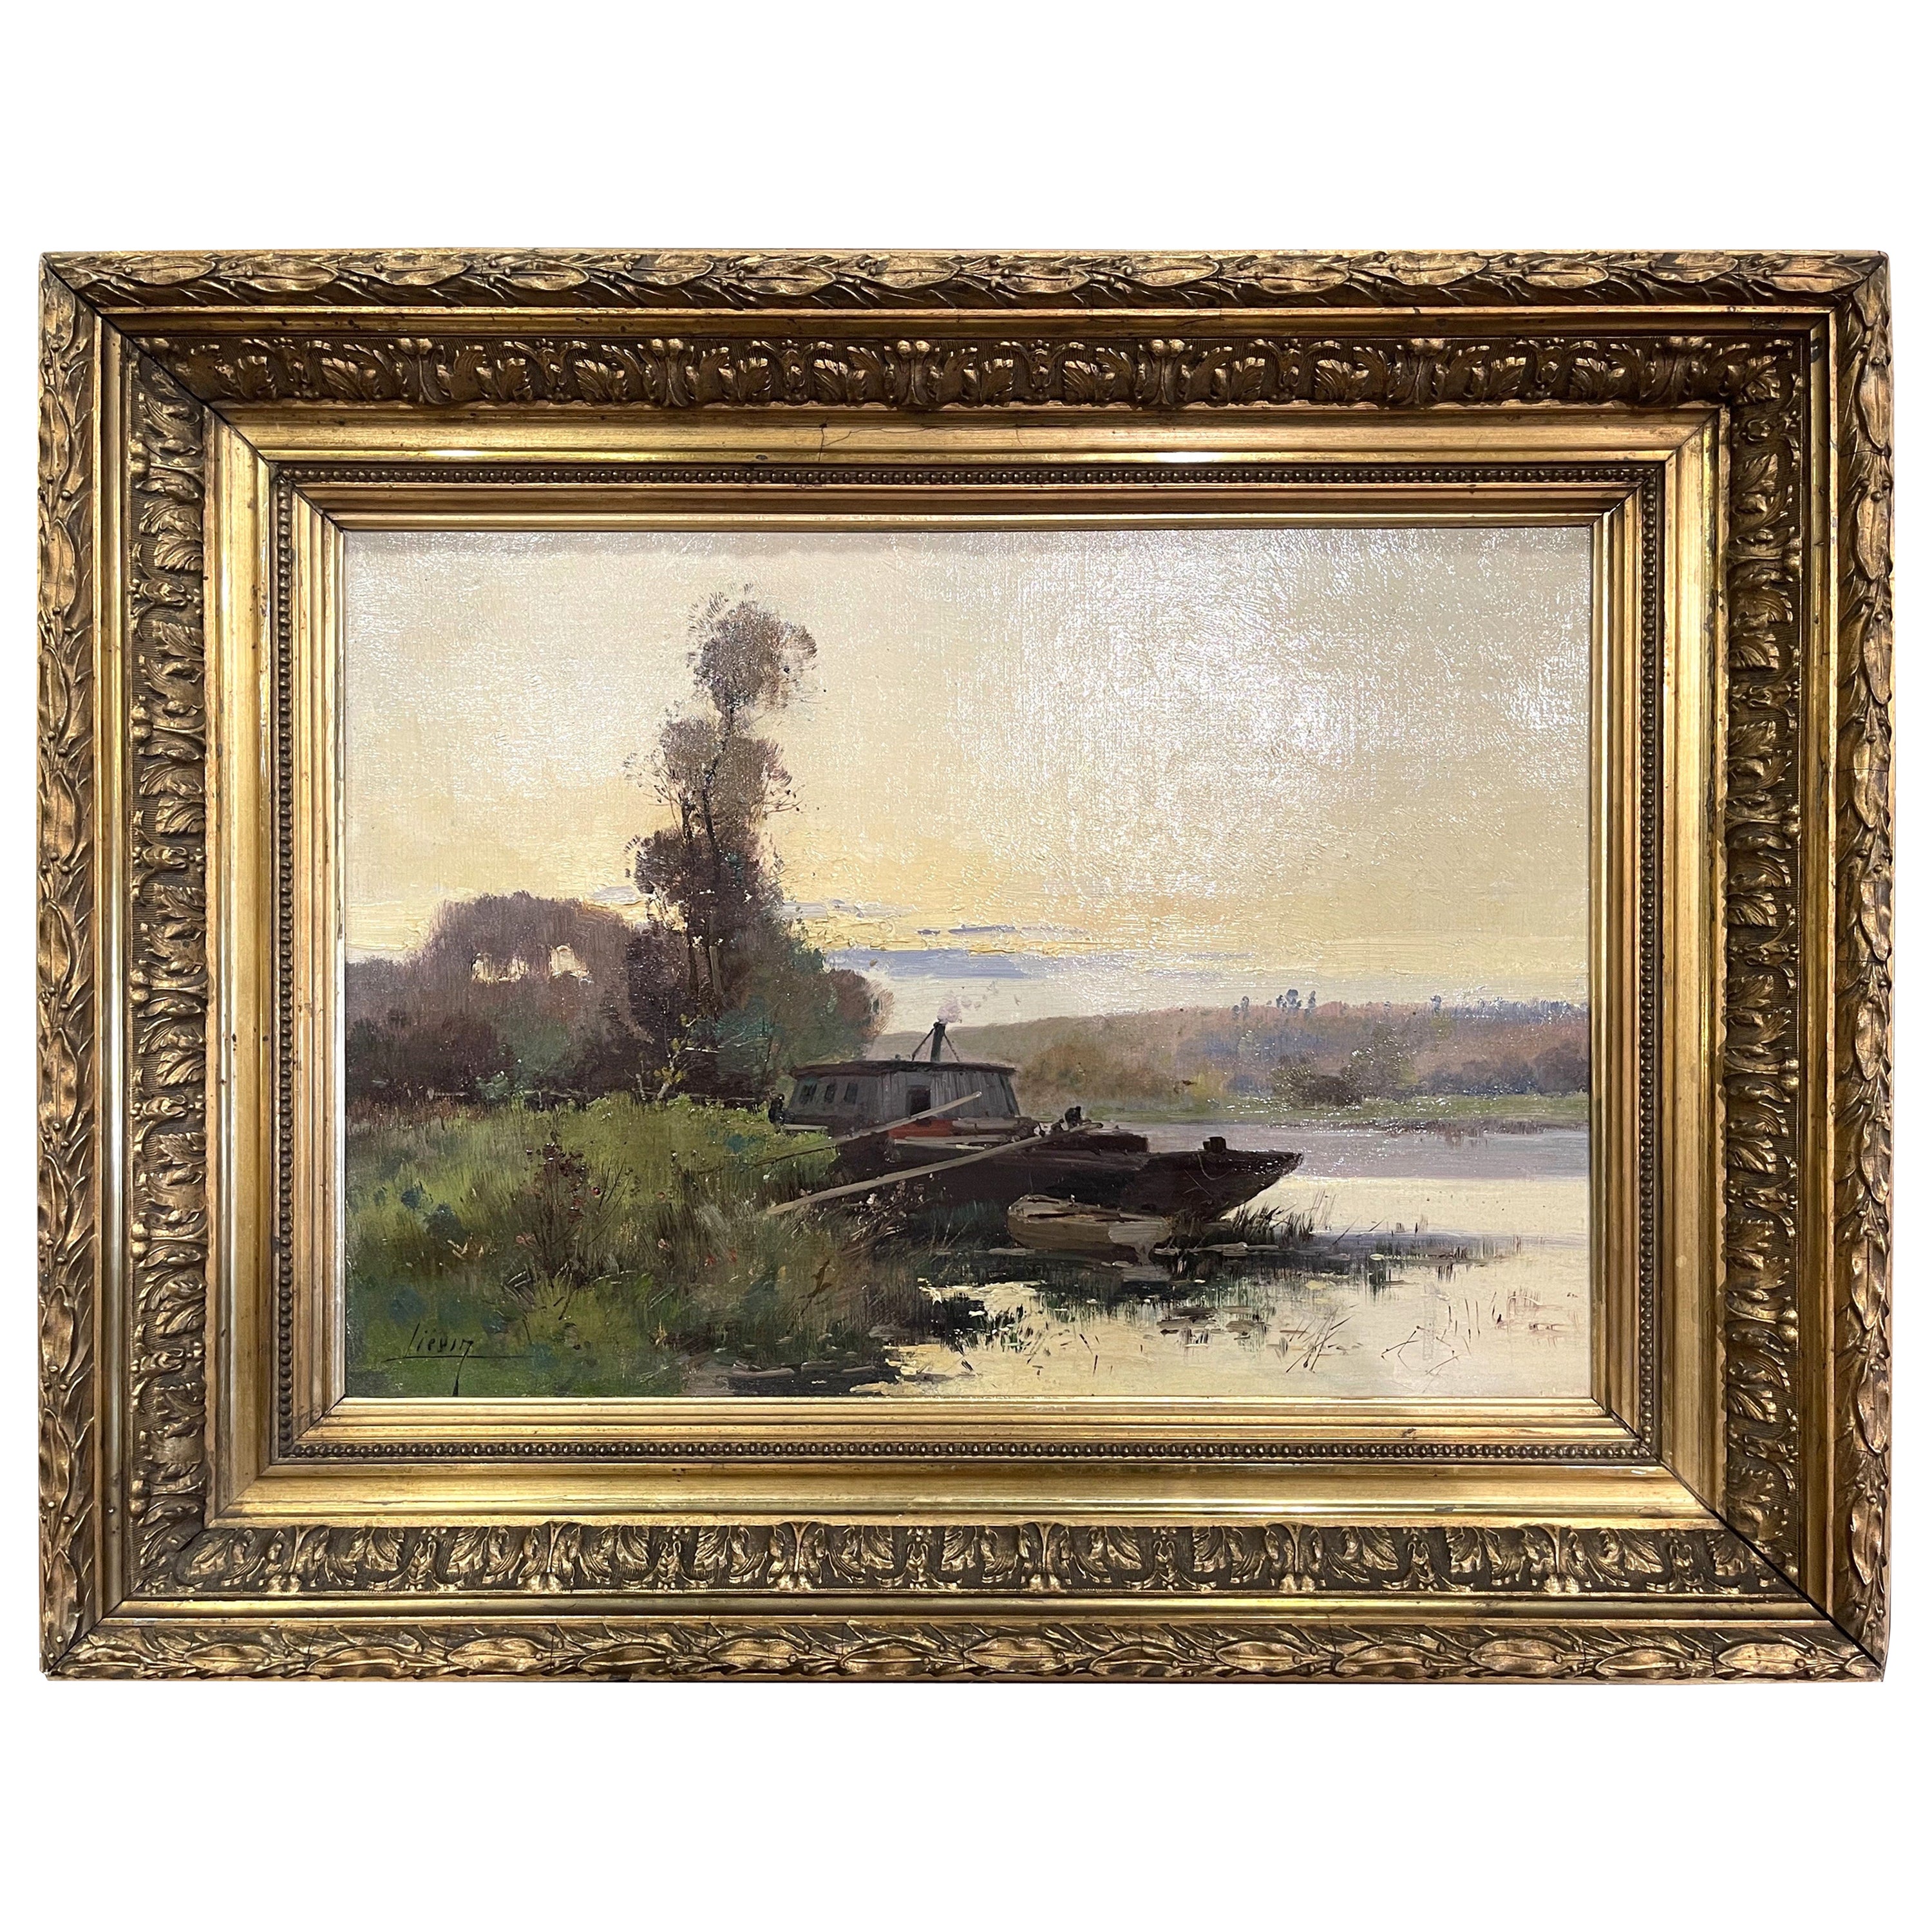 19th Century Oil Painting in Carved Gilt Frame Signed Lievin for E Galien-Laloue